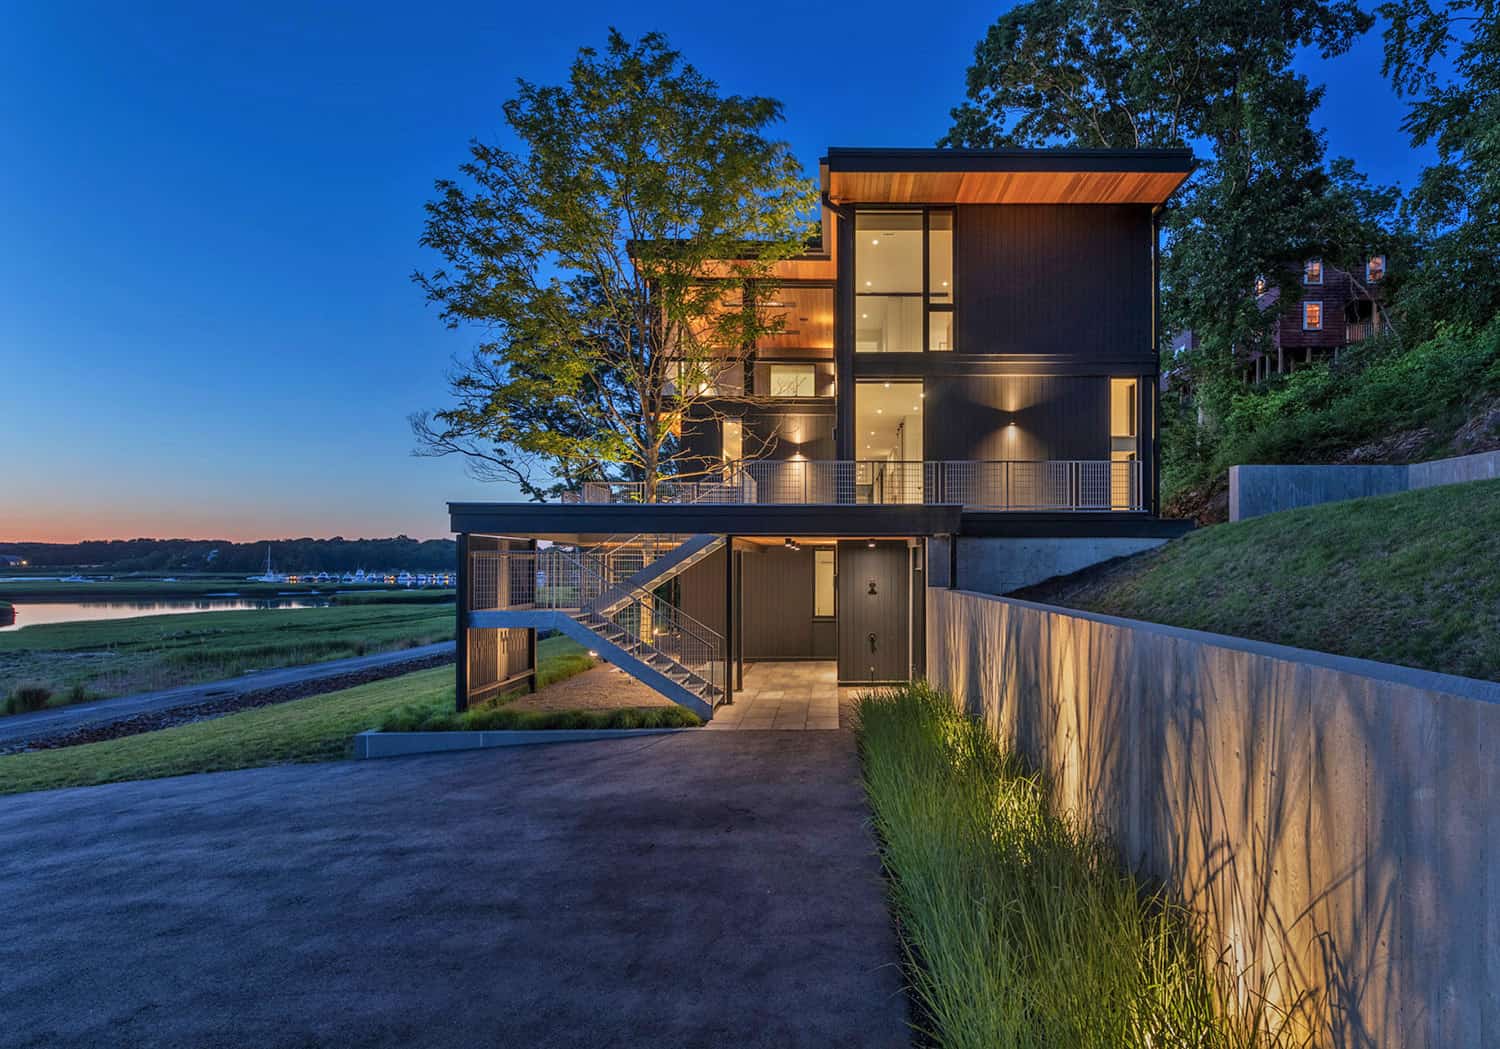 This modern hillside house has amazing views over the Annisquam River